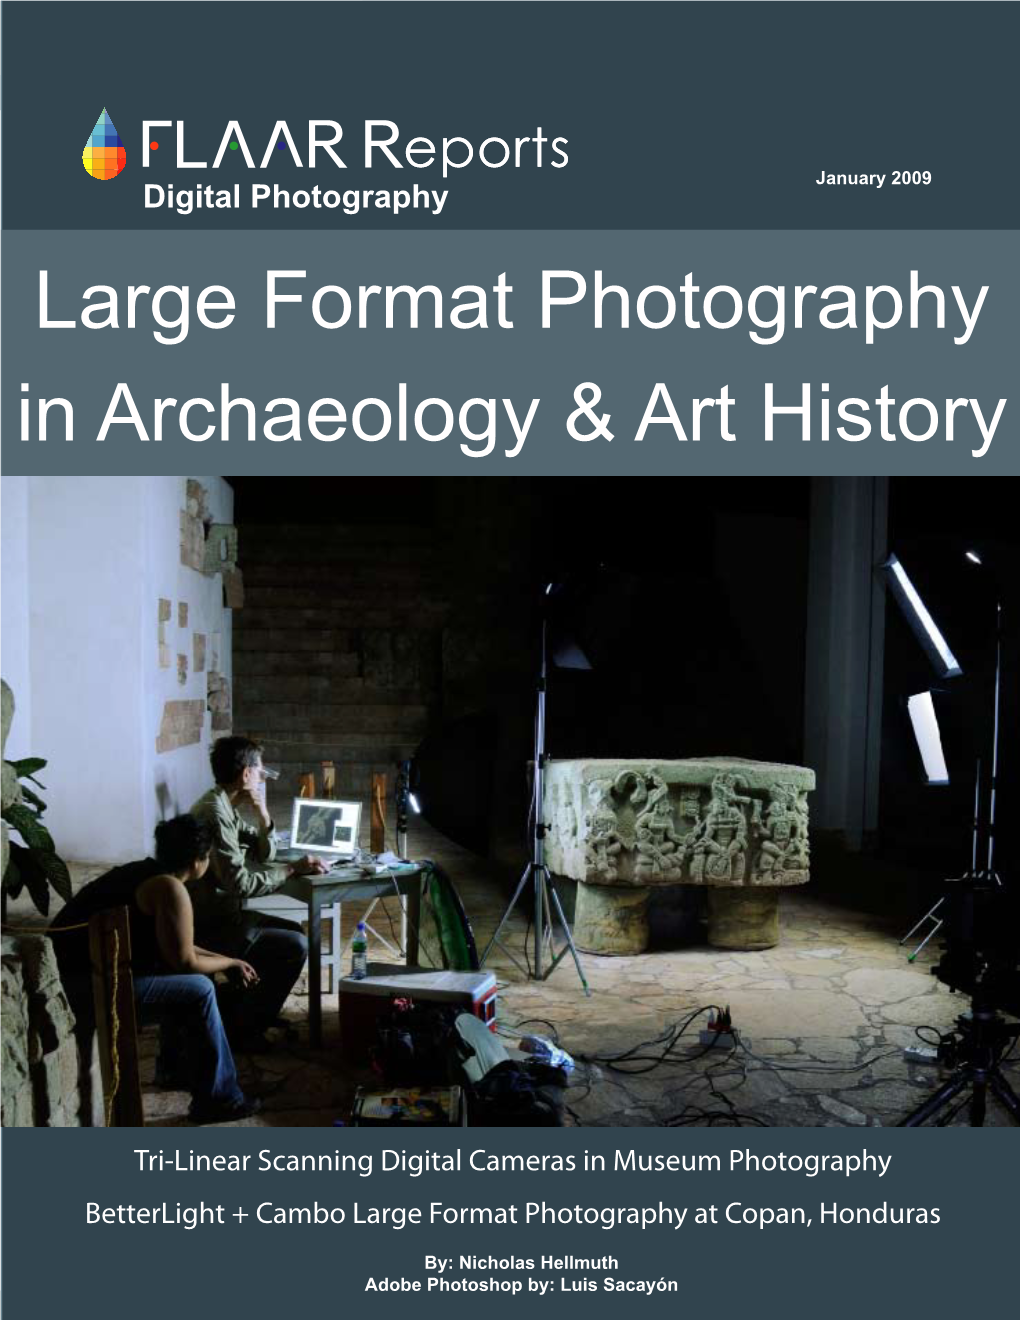 Large Format Photography in Archaeology & Art History